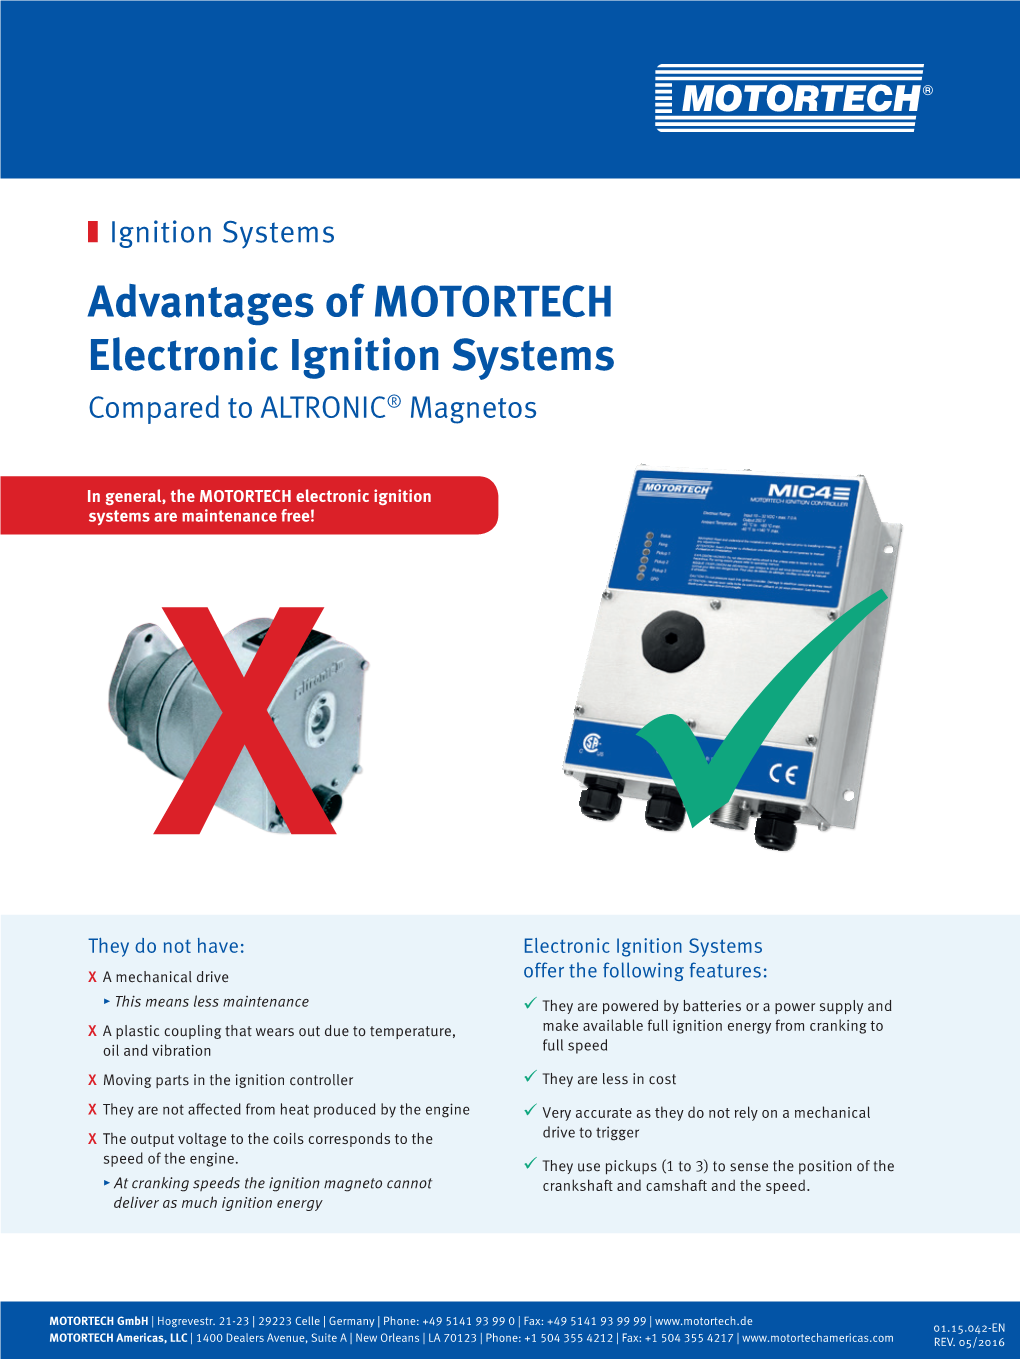 Advantages of MOTORTECH Electronic Ignition Systems Compared to ALTRONIC® Magnetos